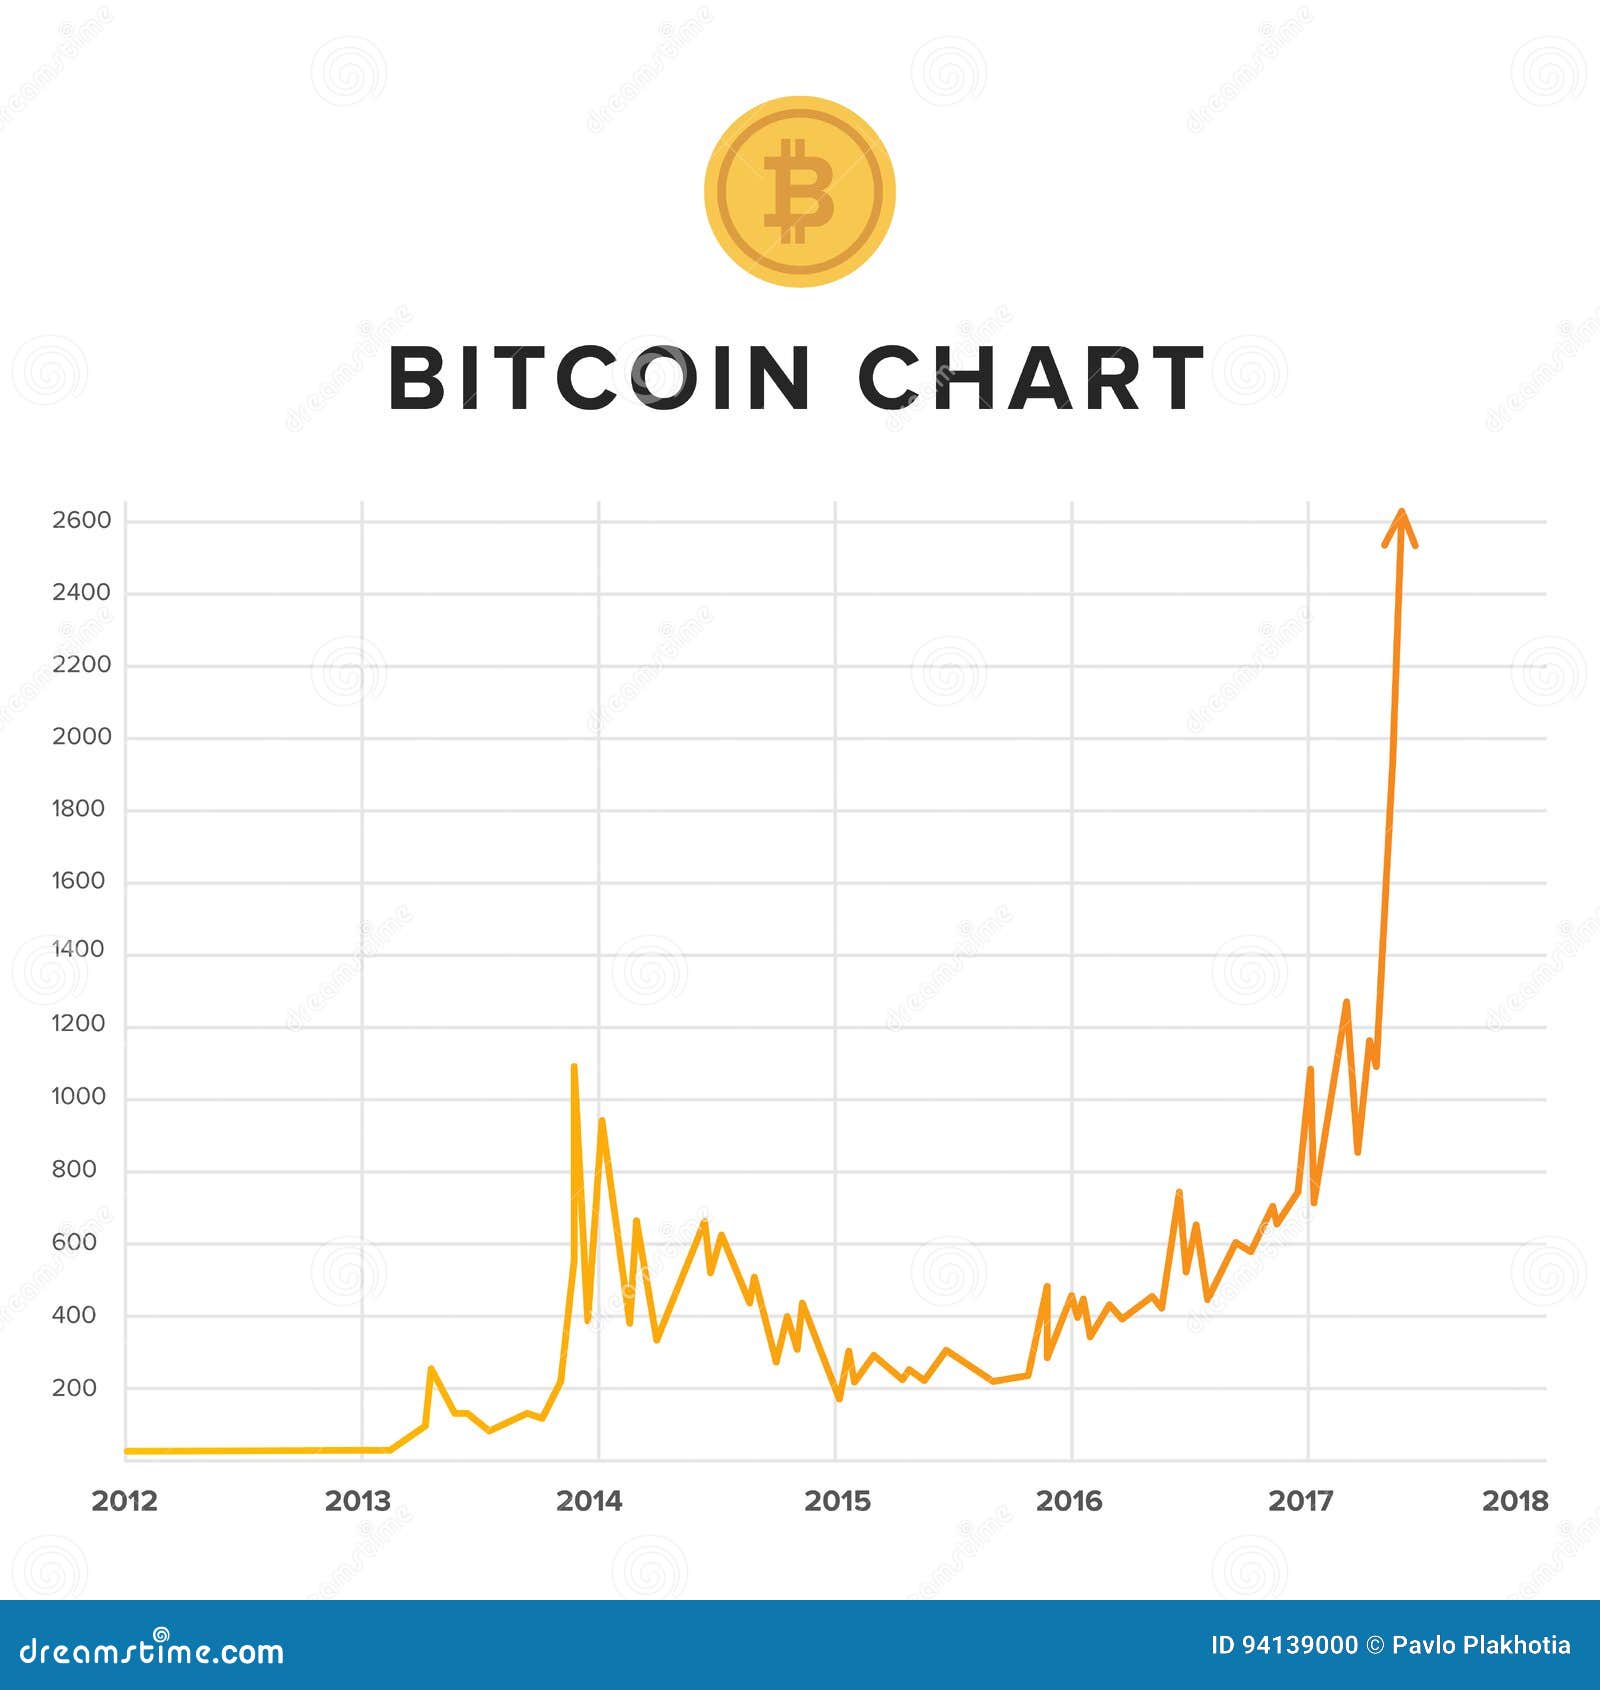 Bitcoin Halving Date & Price History